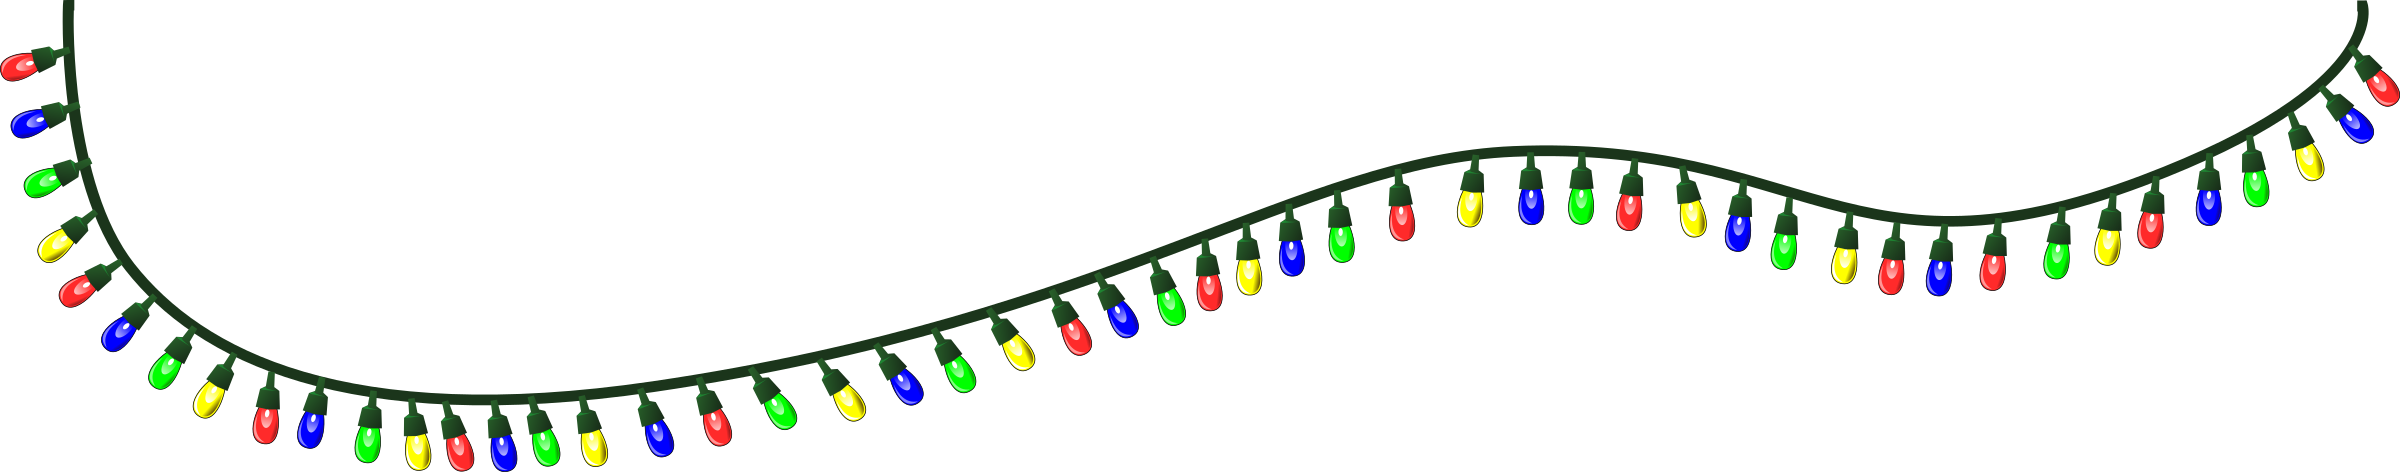 Free Christmas Lights Clipart Transparent Background.